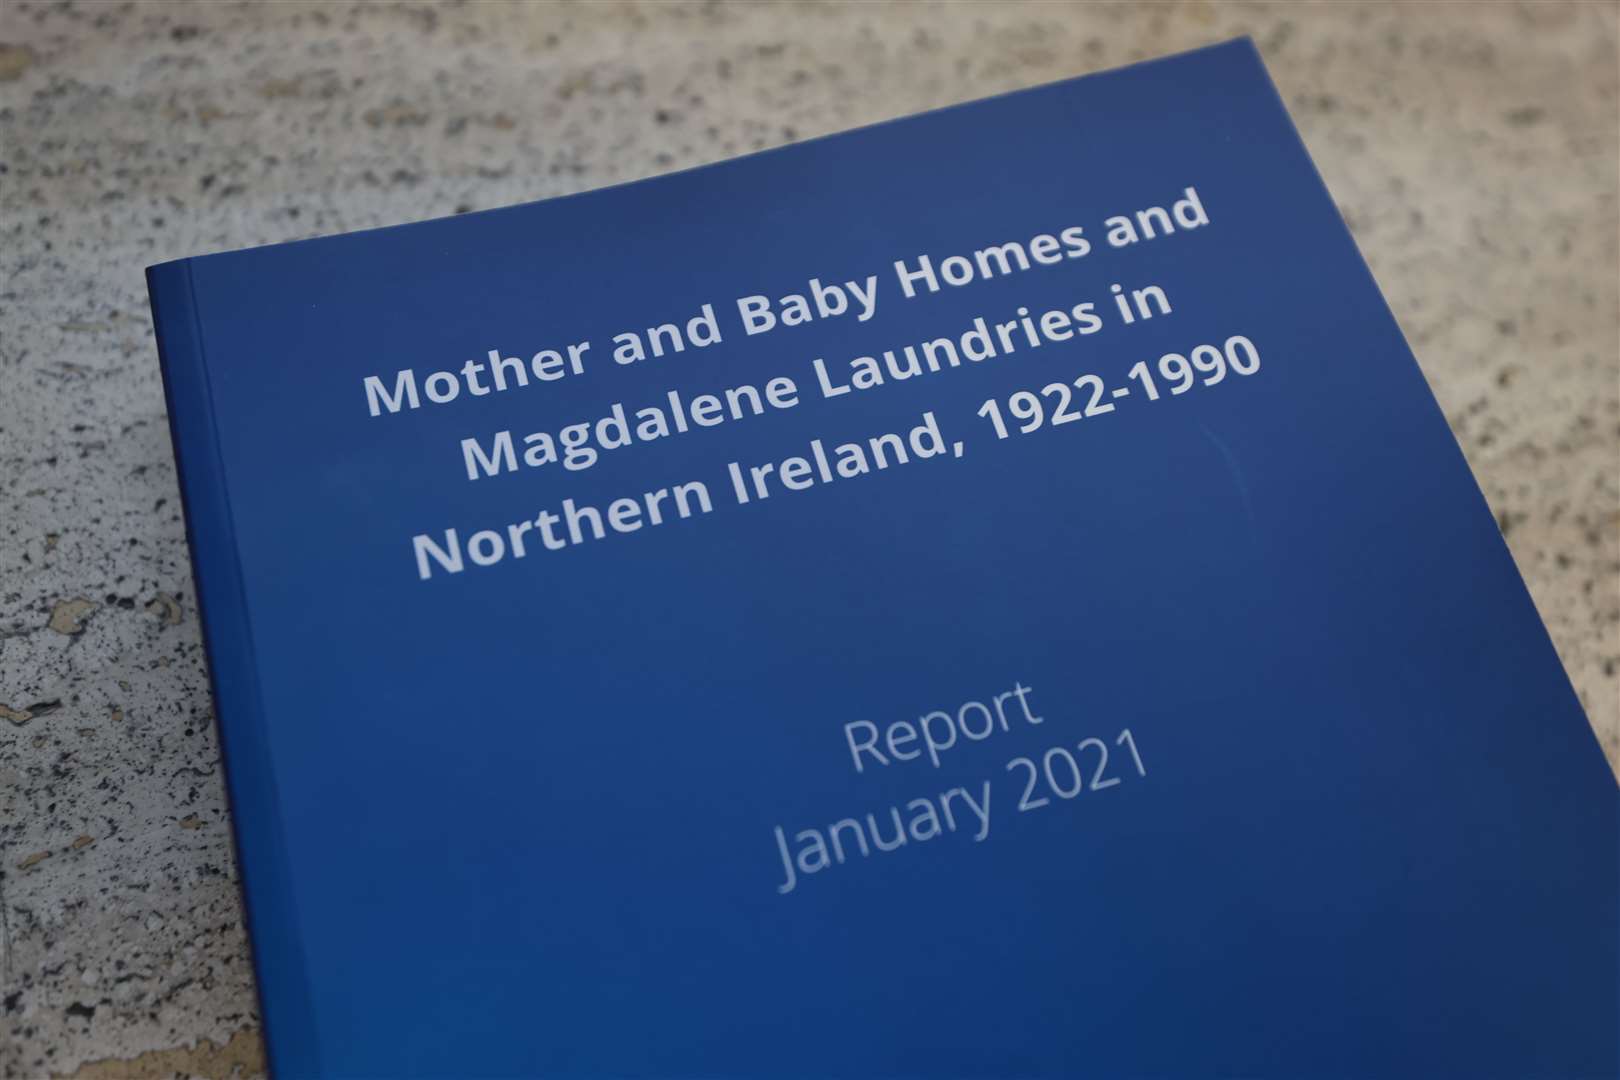 The research report on mother and baby homes and Magdalene laundries (PA)